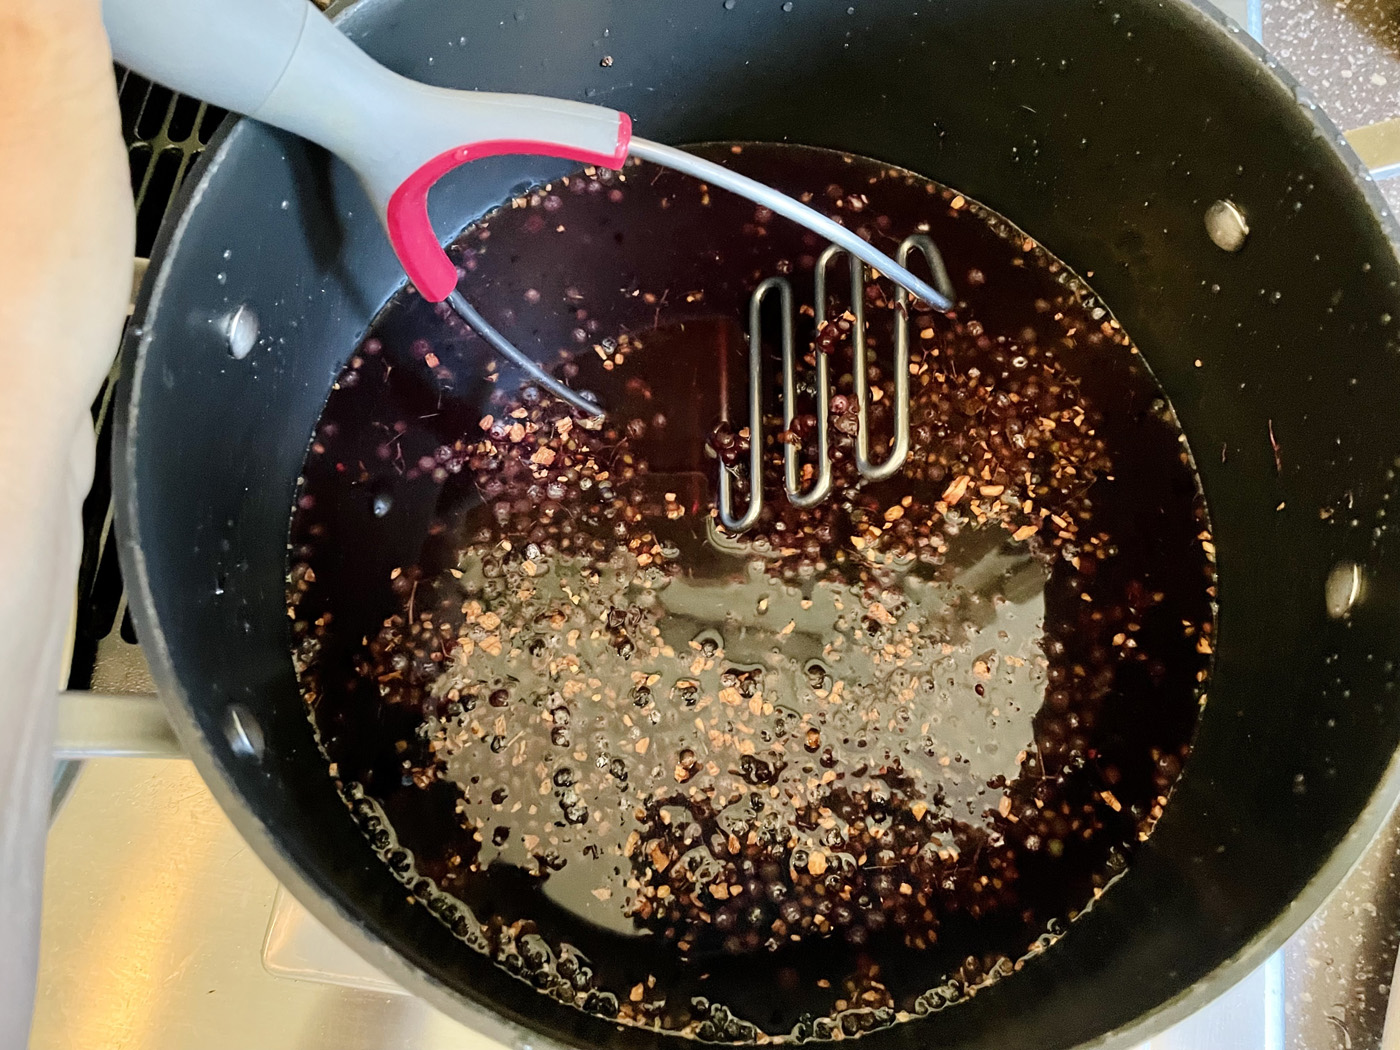 elderberry syrup in pot on stove